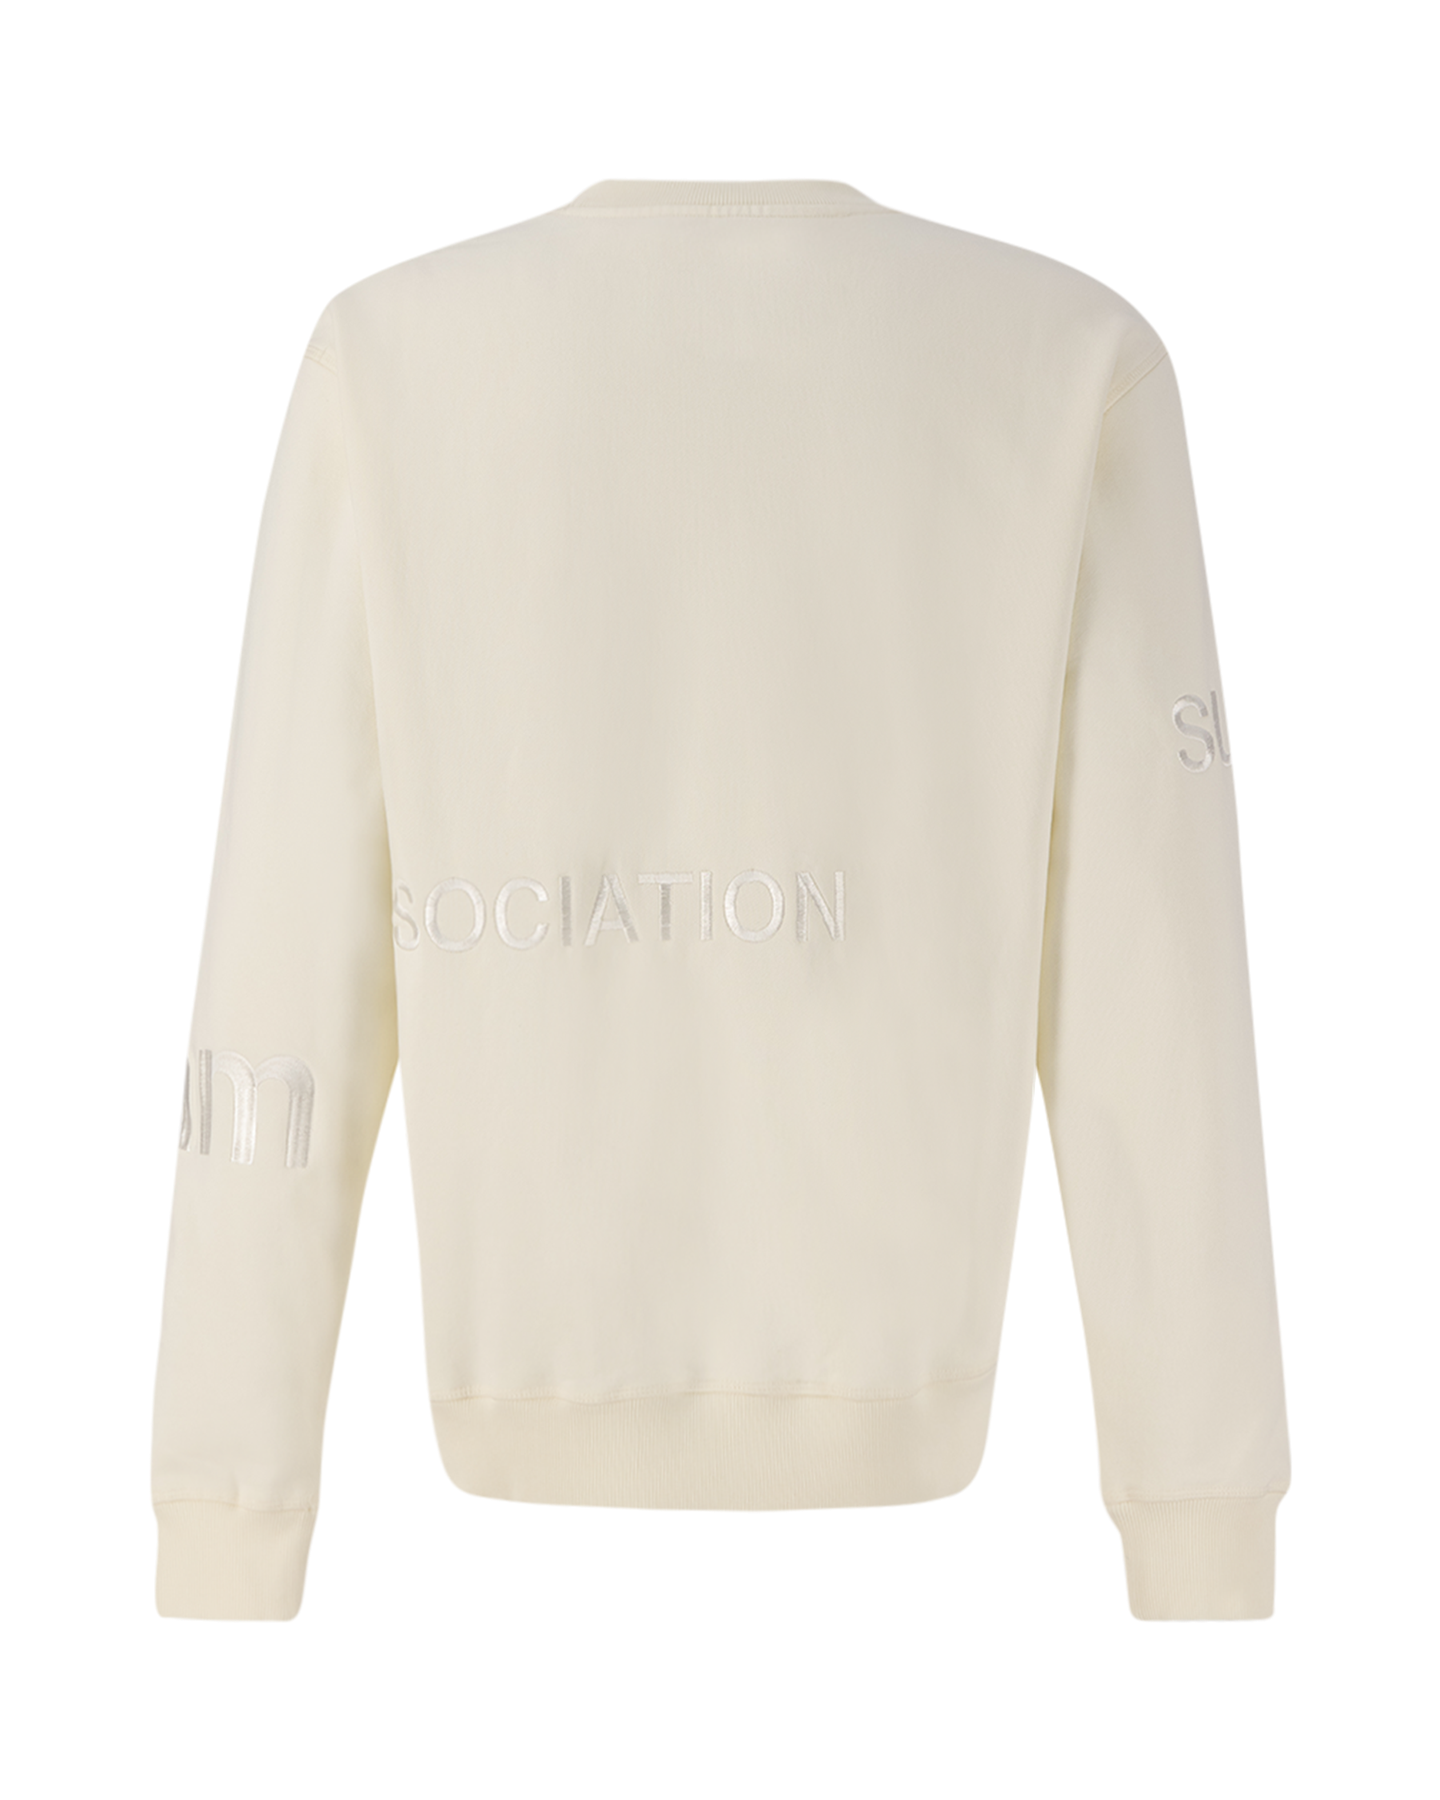 New Amsterdam Surf Association Name Sweat Off White OFFWHITE 2